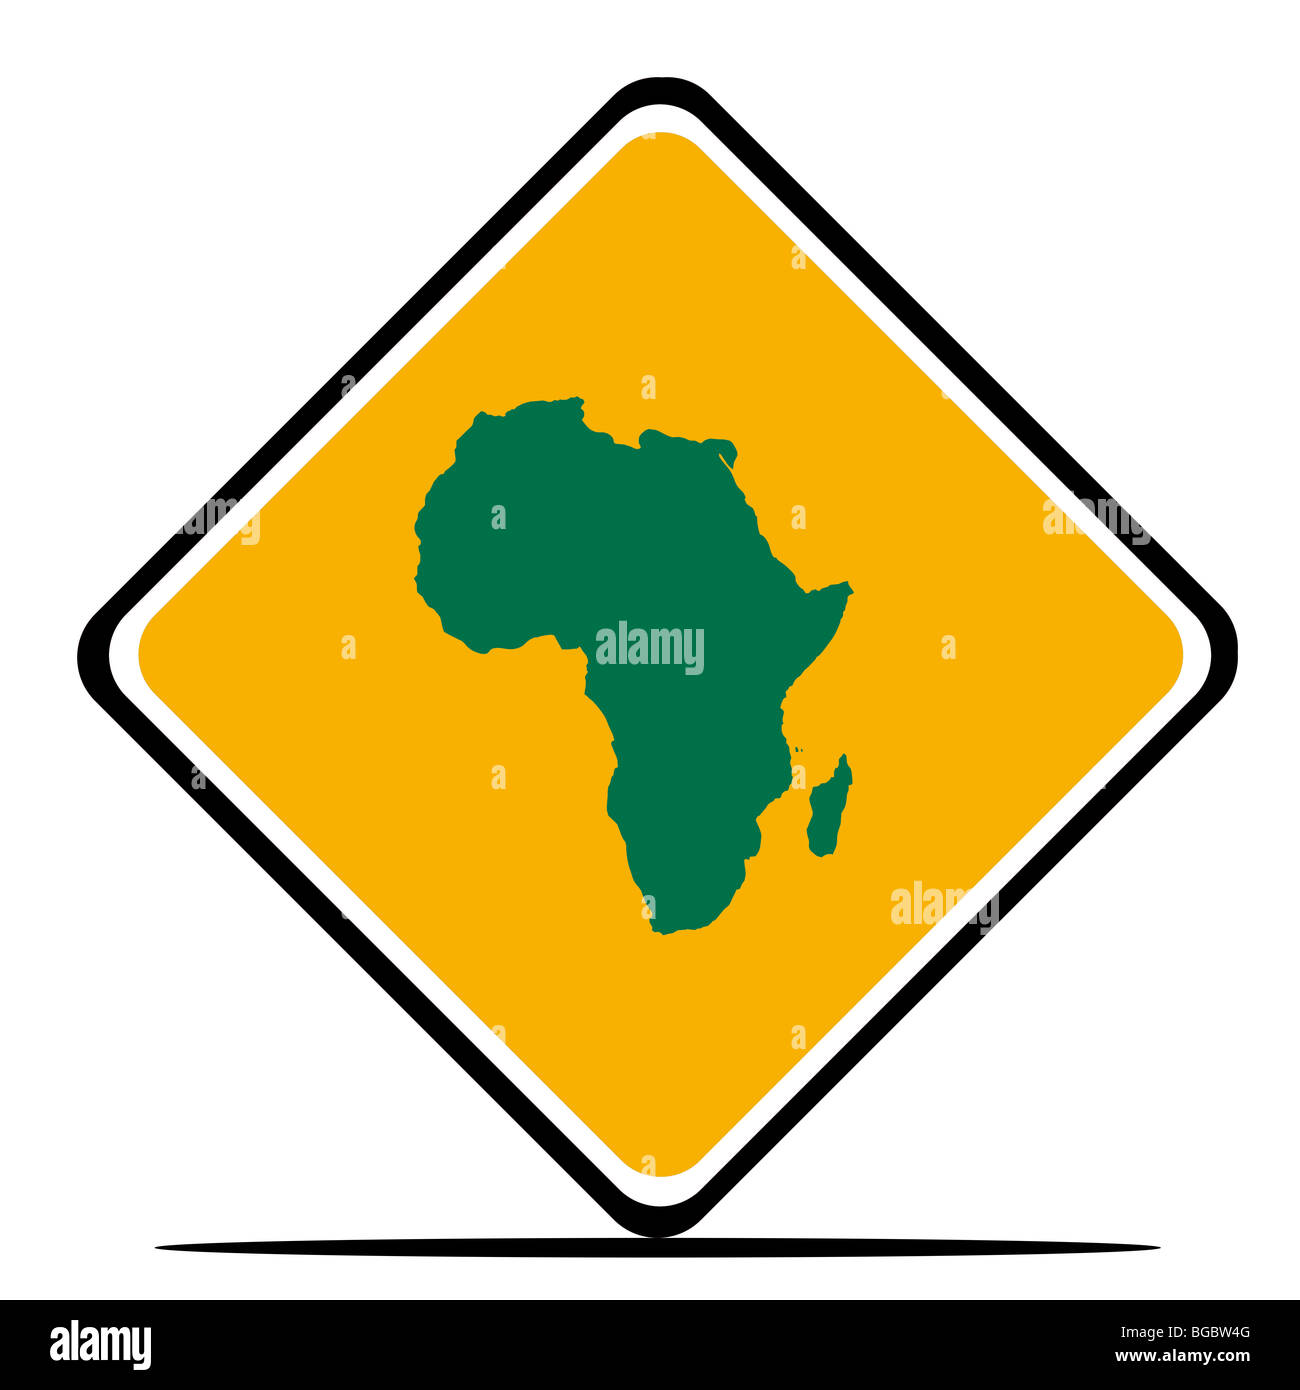 African continent road sign in flag colors, isolated on white background. Stock Photo